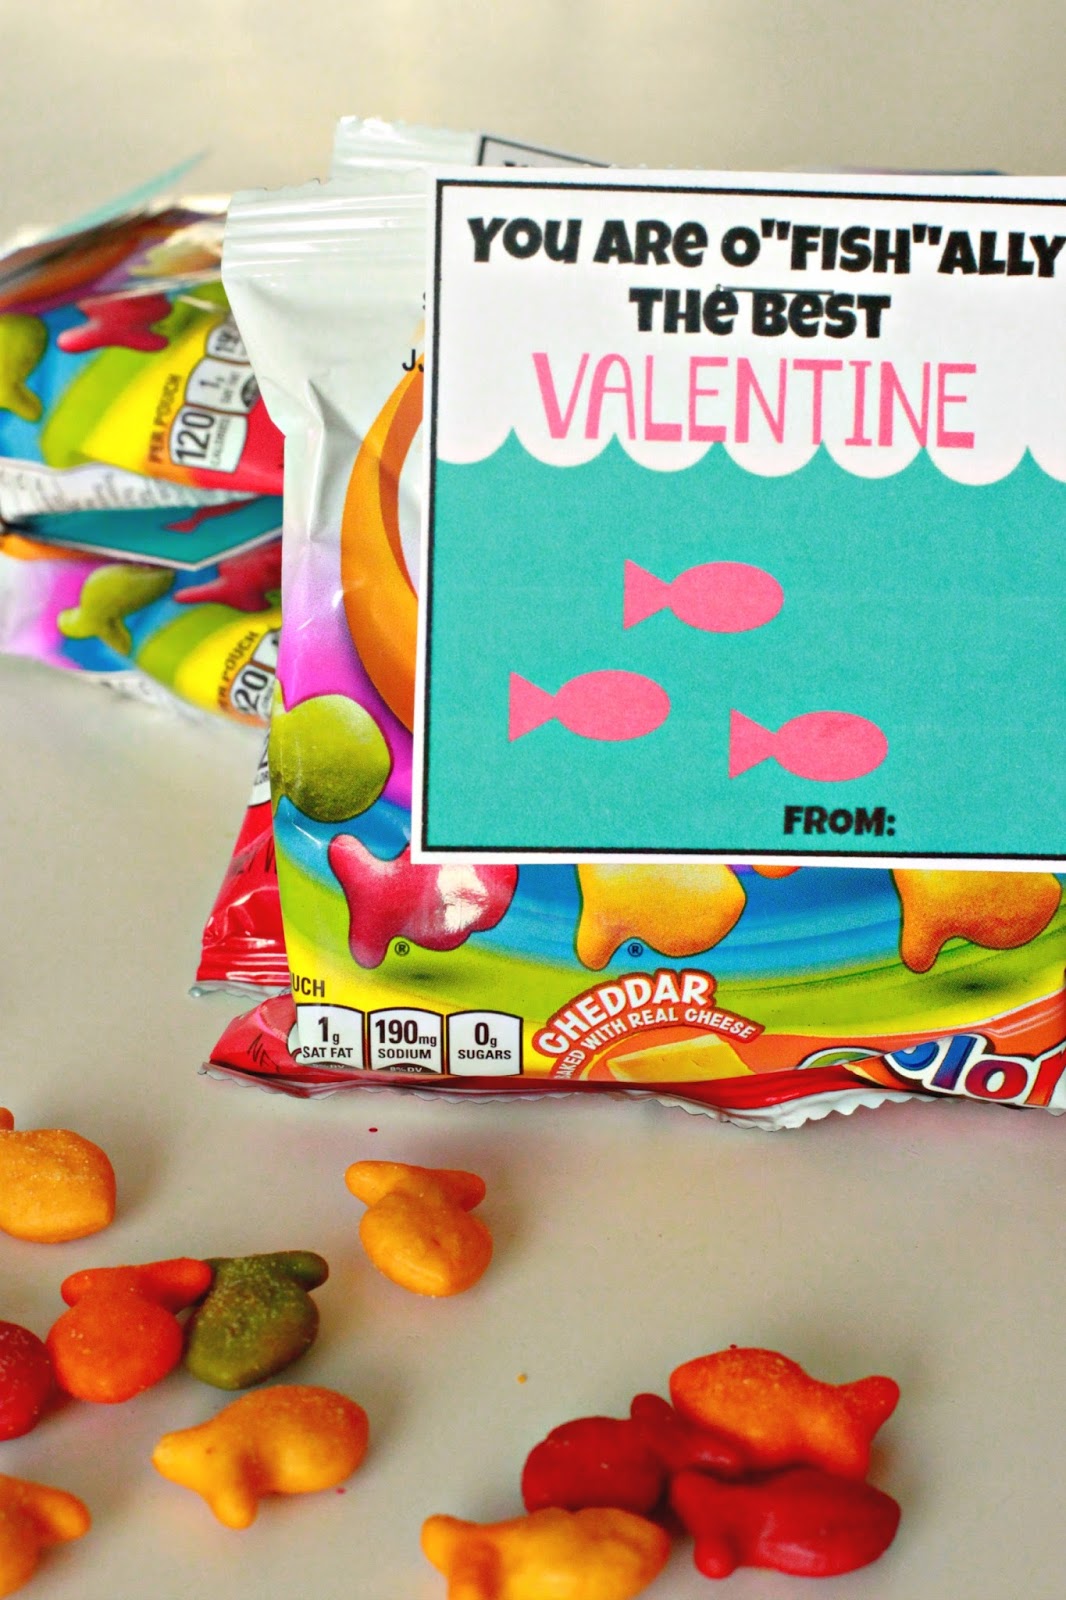 larissa-another-day-o-fish-ally-the-best-valentine